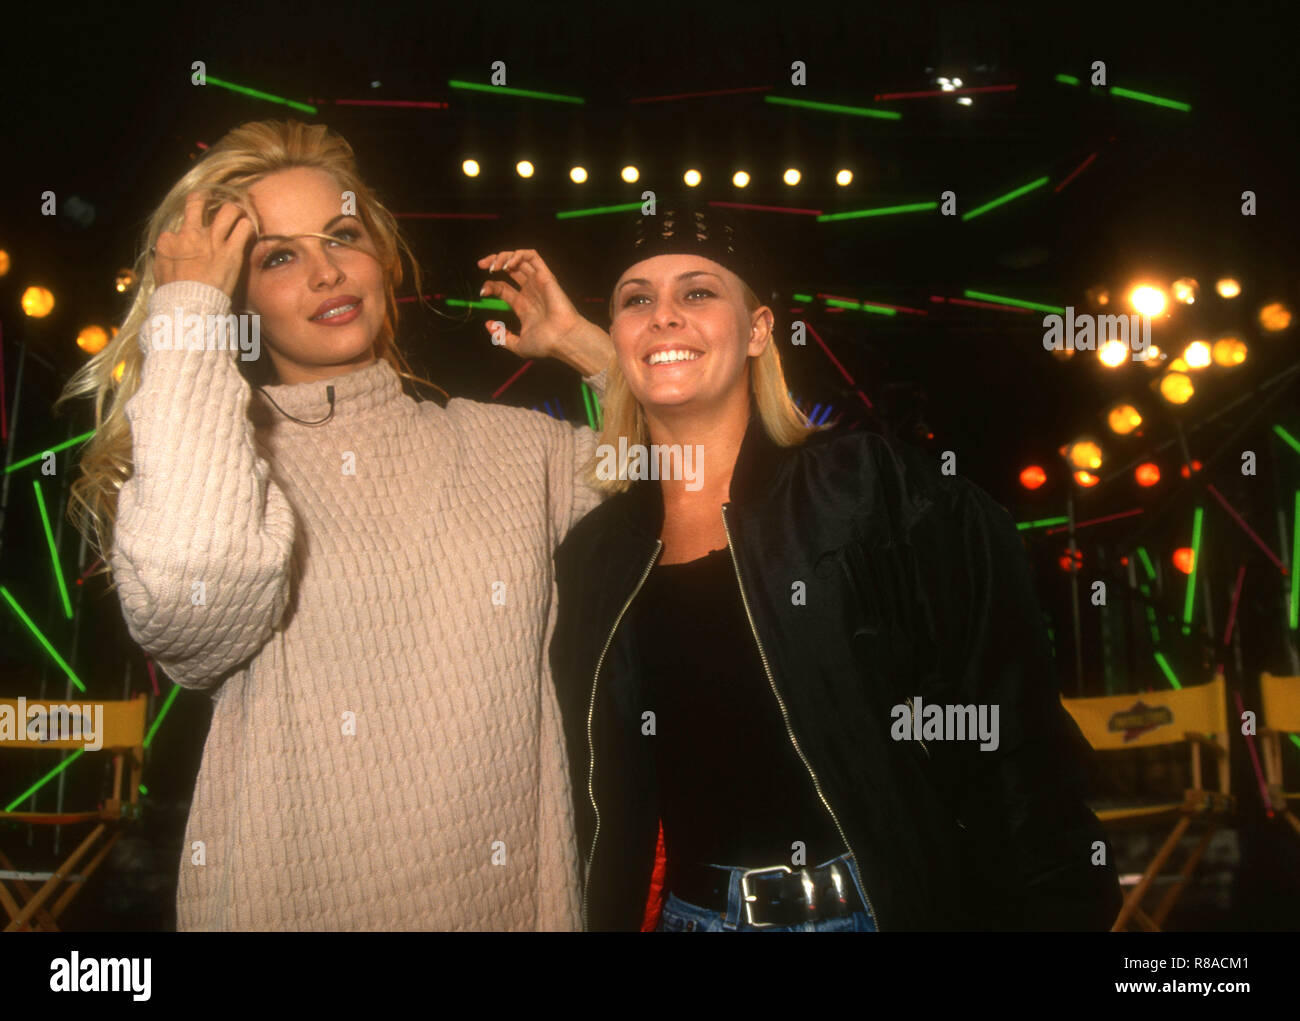 UNIVERSAL CITY, CA - APRIL 17: Actress Pamela Anderson and actress Nicole Eggert attend 'Baywatch' Exclusive Behind-the-Scenes Tour on April 17, 1993 at Universal Studios Hollywood in Universal City, California. Photo by Barry King/Alamy Stock Photo Stock Photo